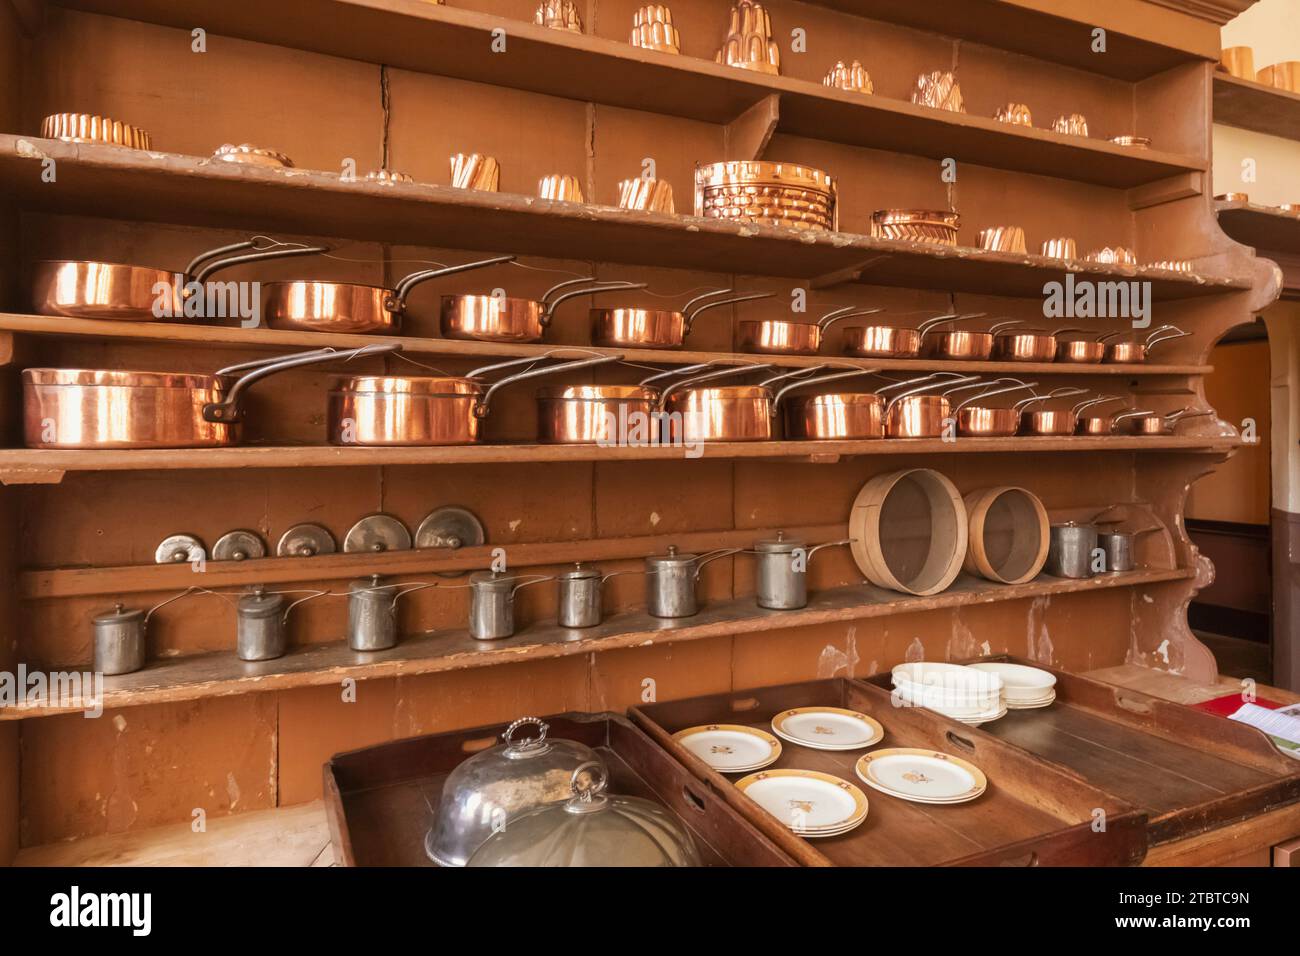 England, West Sussex, Petworth, Petworth House, The Servants Quarters, The Kitchen, Display of Kitchenware Stock Photo